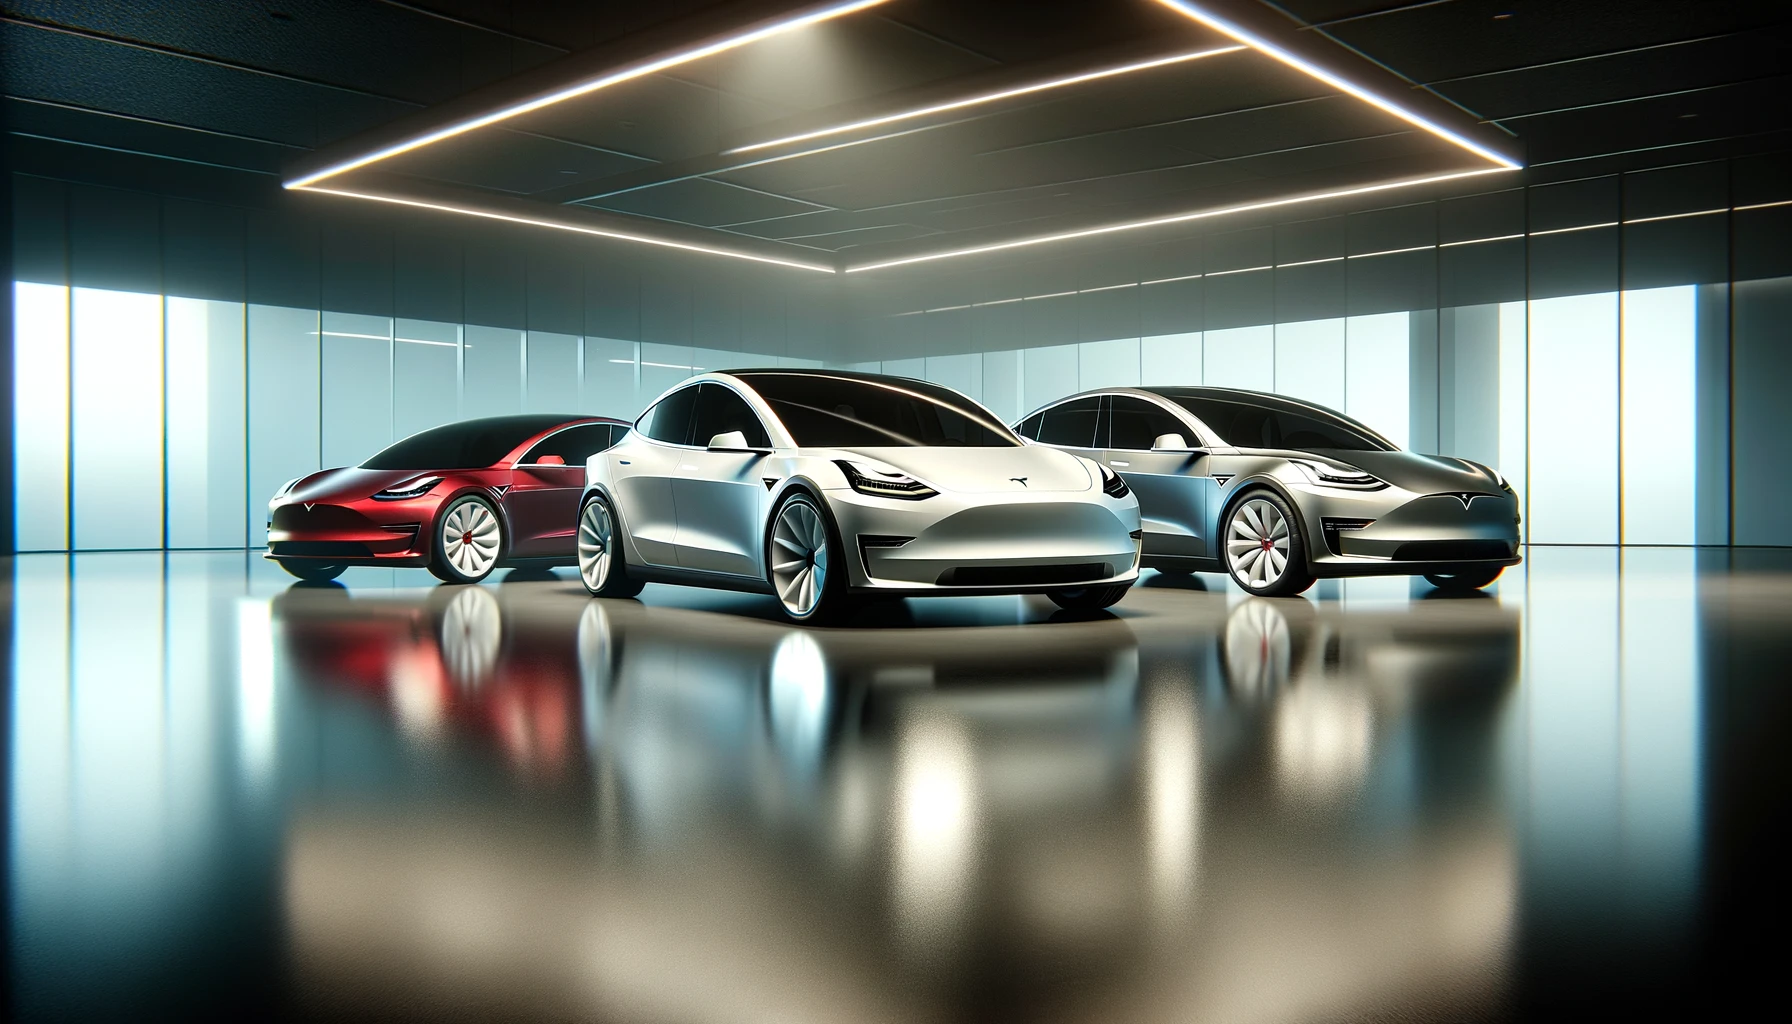 Three Tesla vehicles, Model Y, Model X, and Model S, displayed side by side in a modern showroom setting, highlighting their sleek design and luxury appeal.